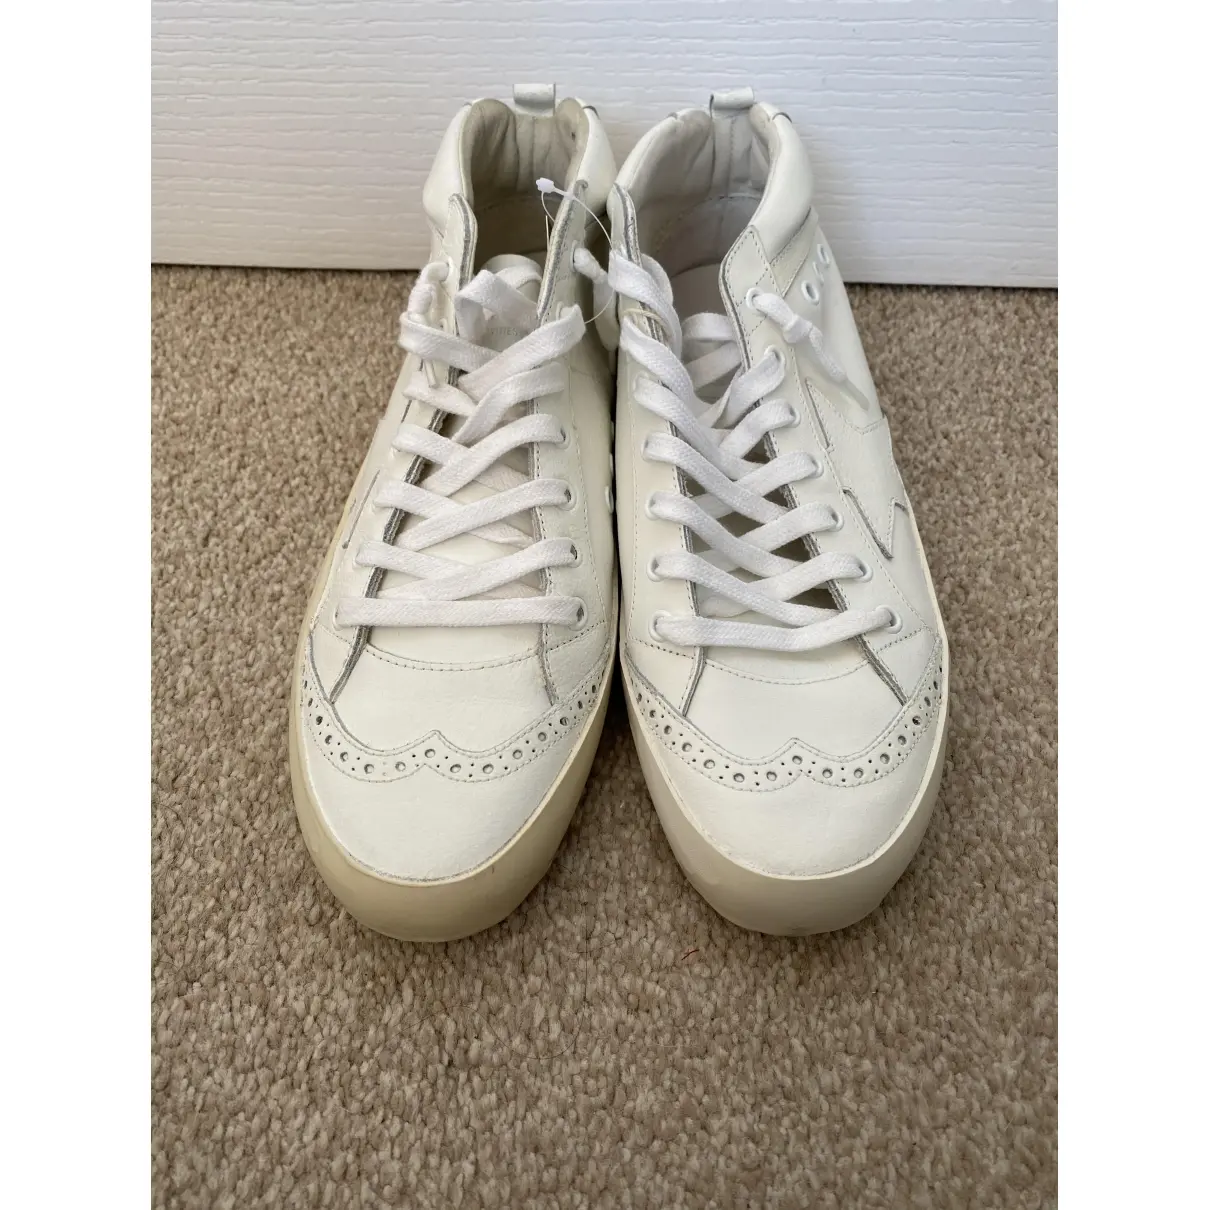 Golden Goose Mid Star leather high trainers for sale